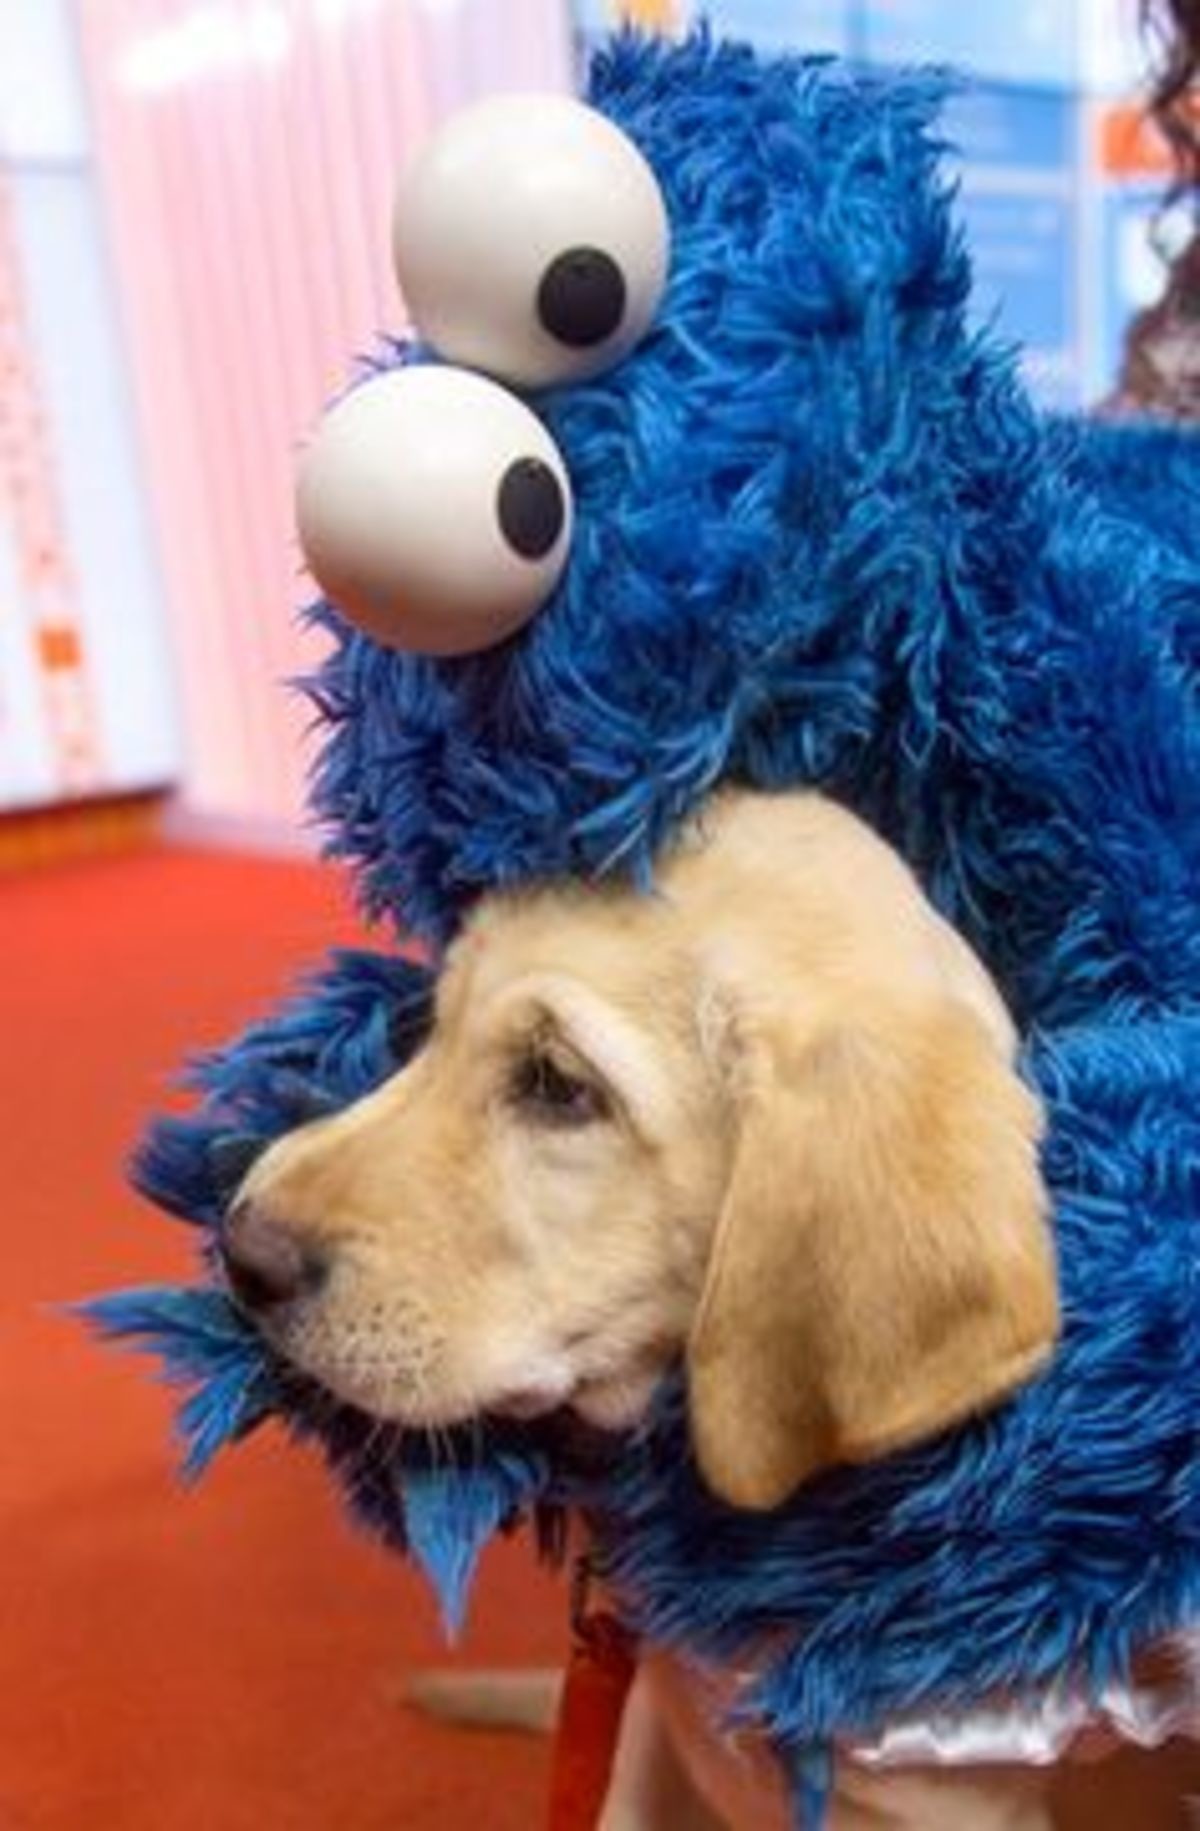 They are both cookie monsters. .